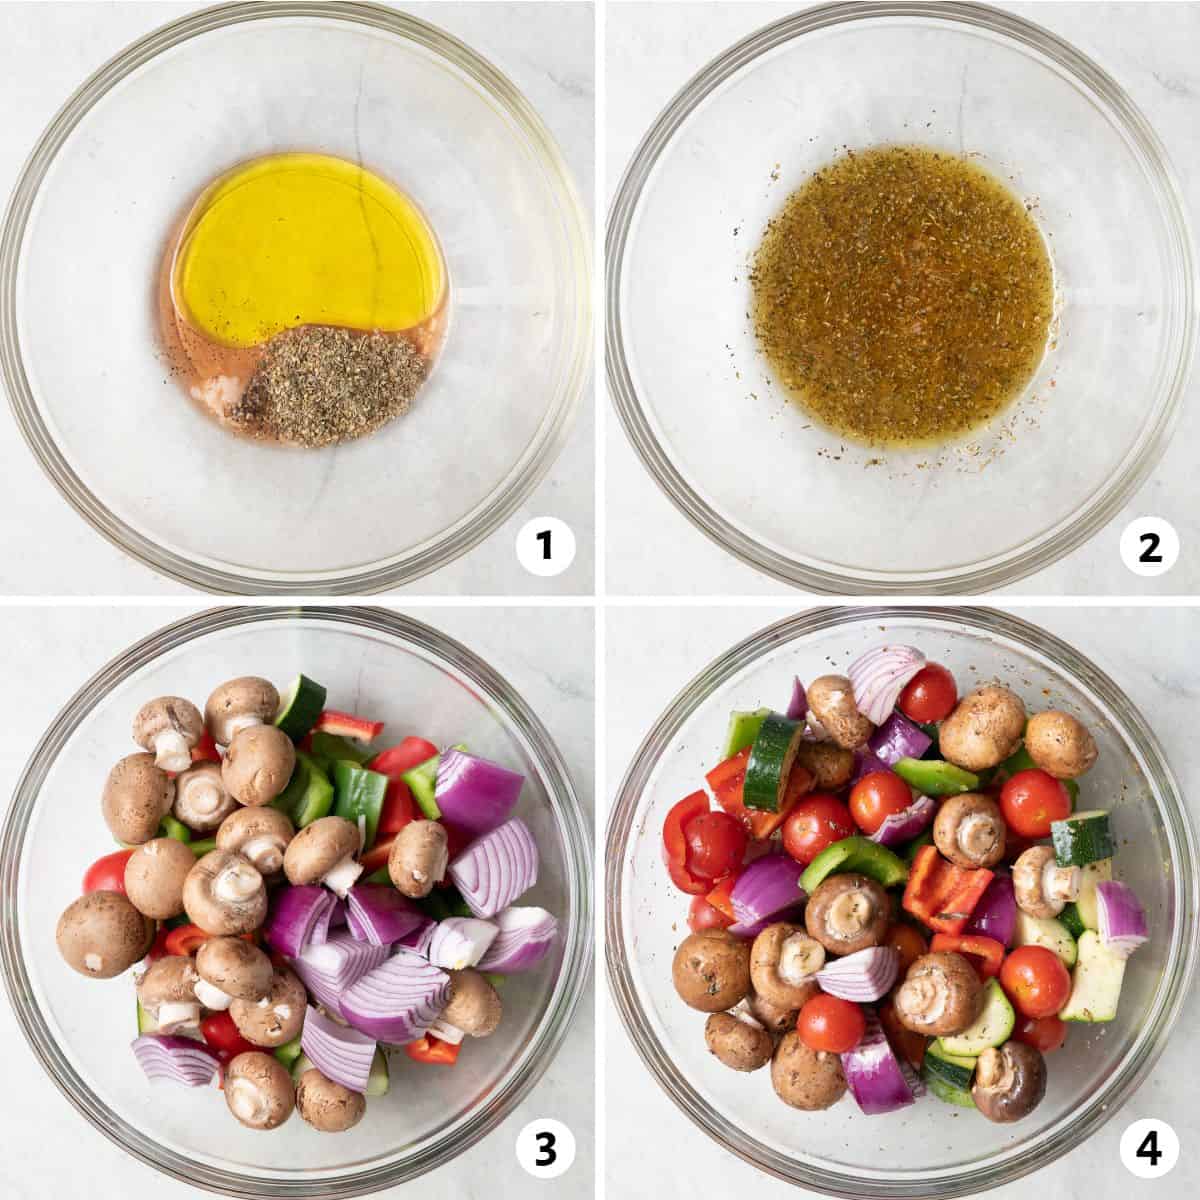 4 image collage preparing recipe: 1- oil, vinegar, and spices in a bowl, 2- after emulsifying, 3- fresh vegetable medley added to bowl, 4- after coating with mixture.